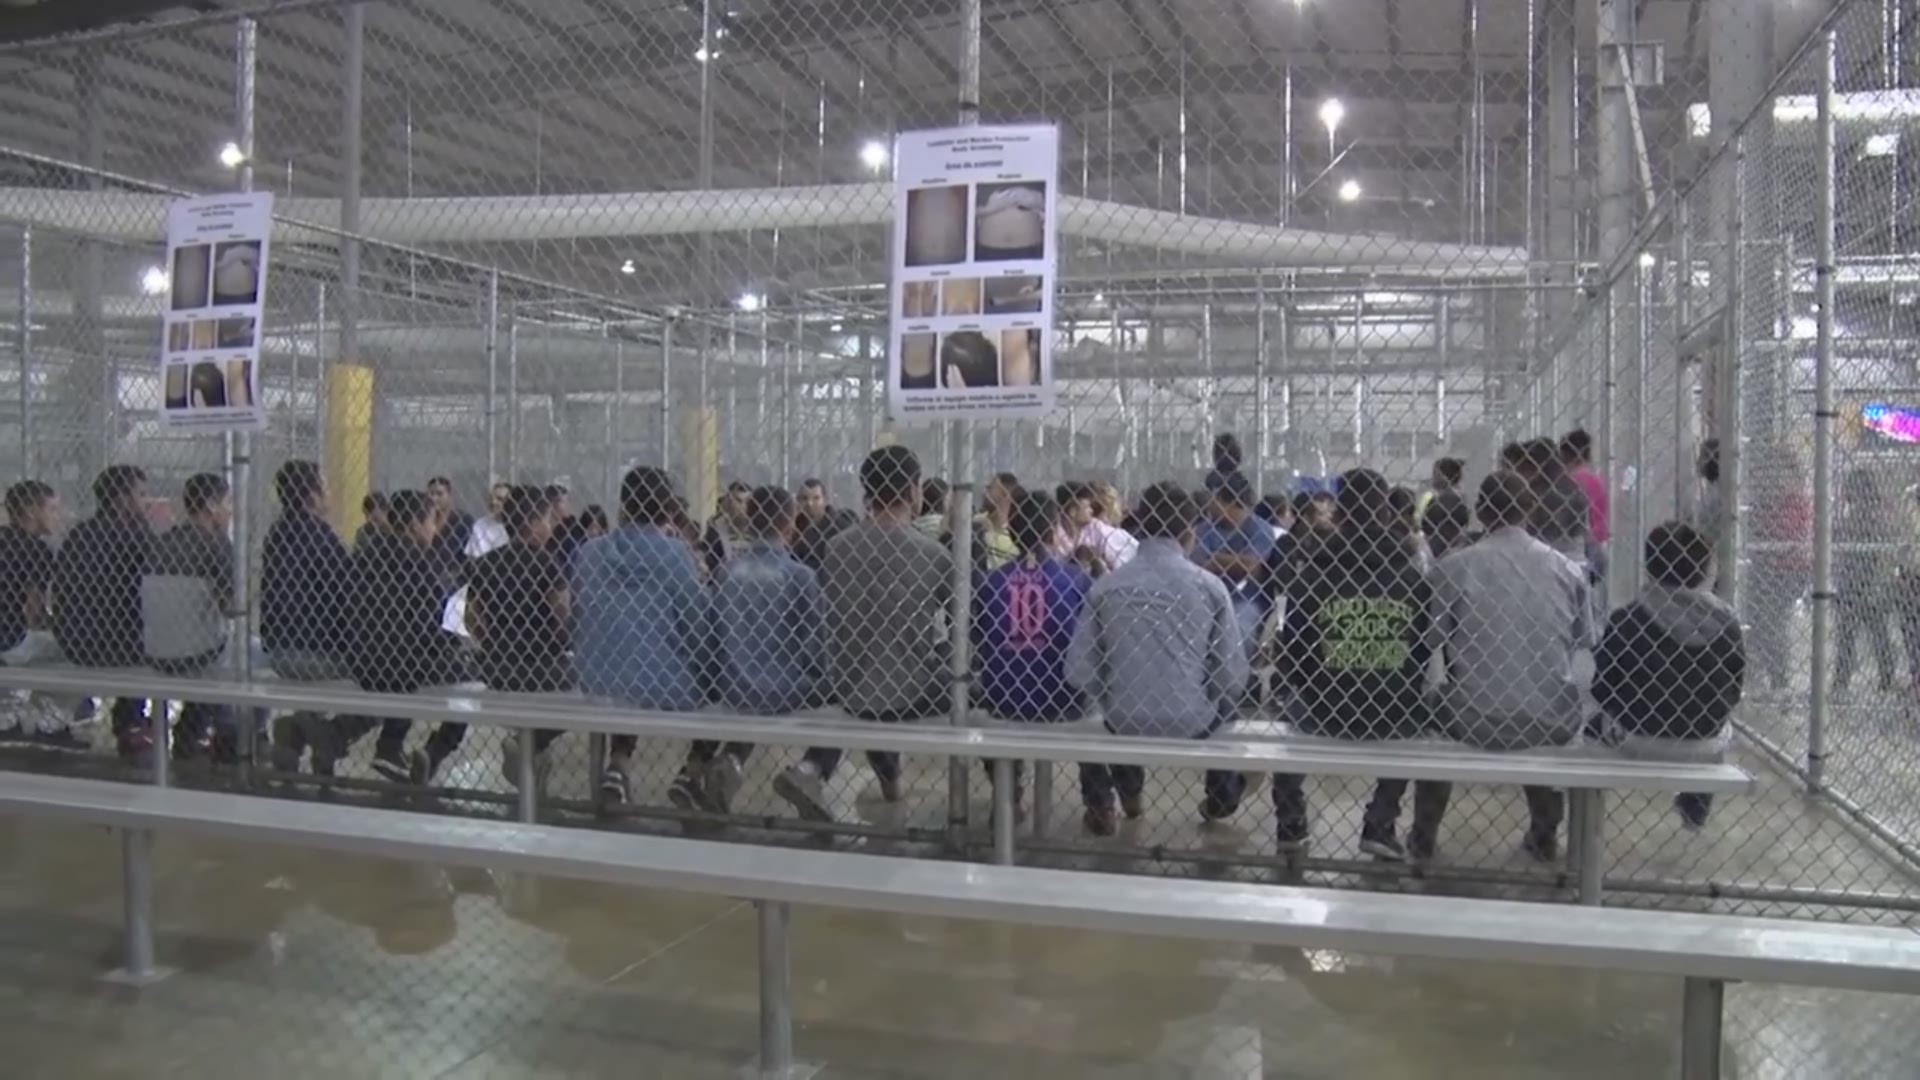 The U.S. Customs and Border Protection Office of Public Affairs released this video from a immigrant processing facility journalists toured Sunday in McAllen, Texas.